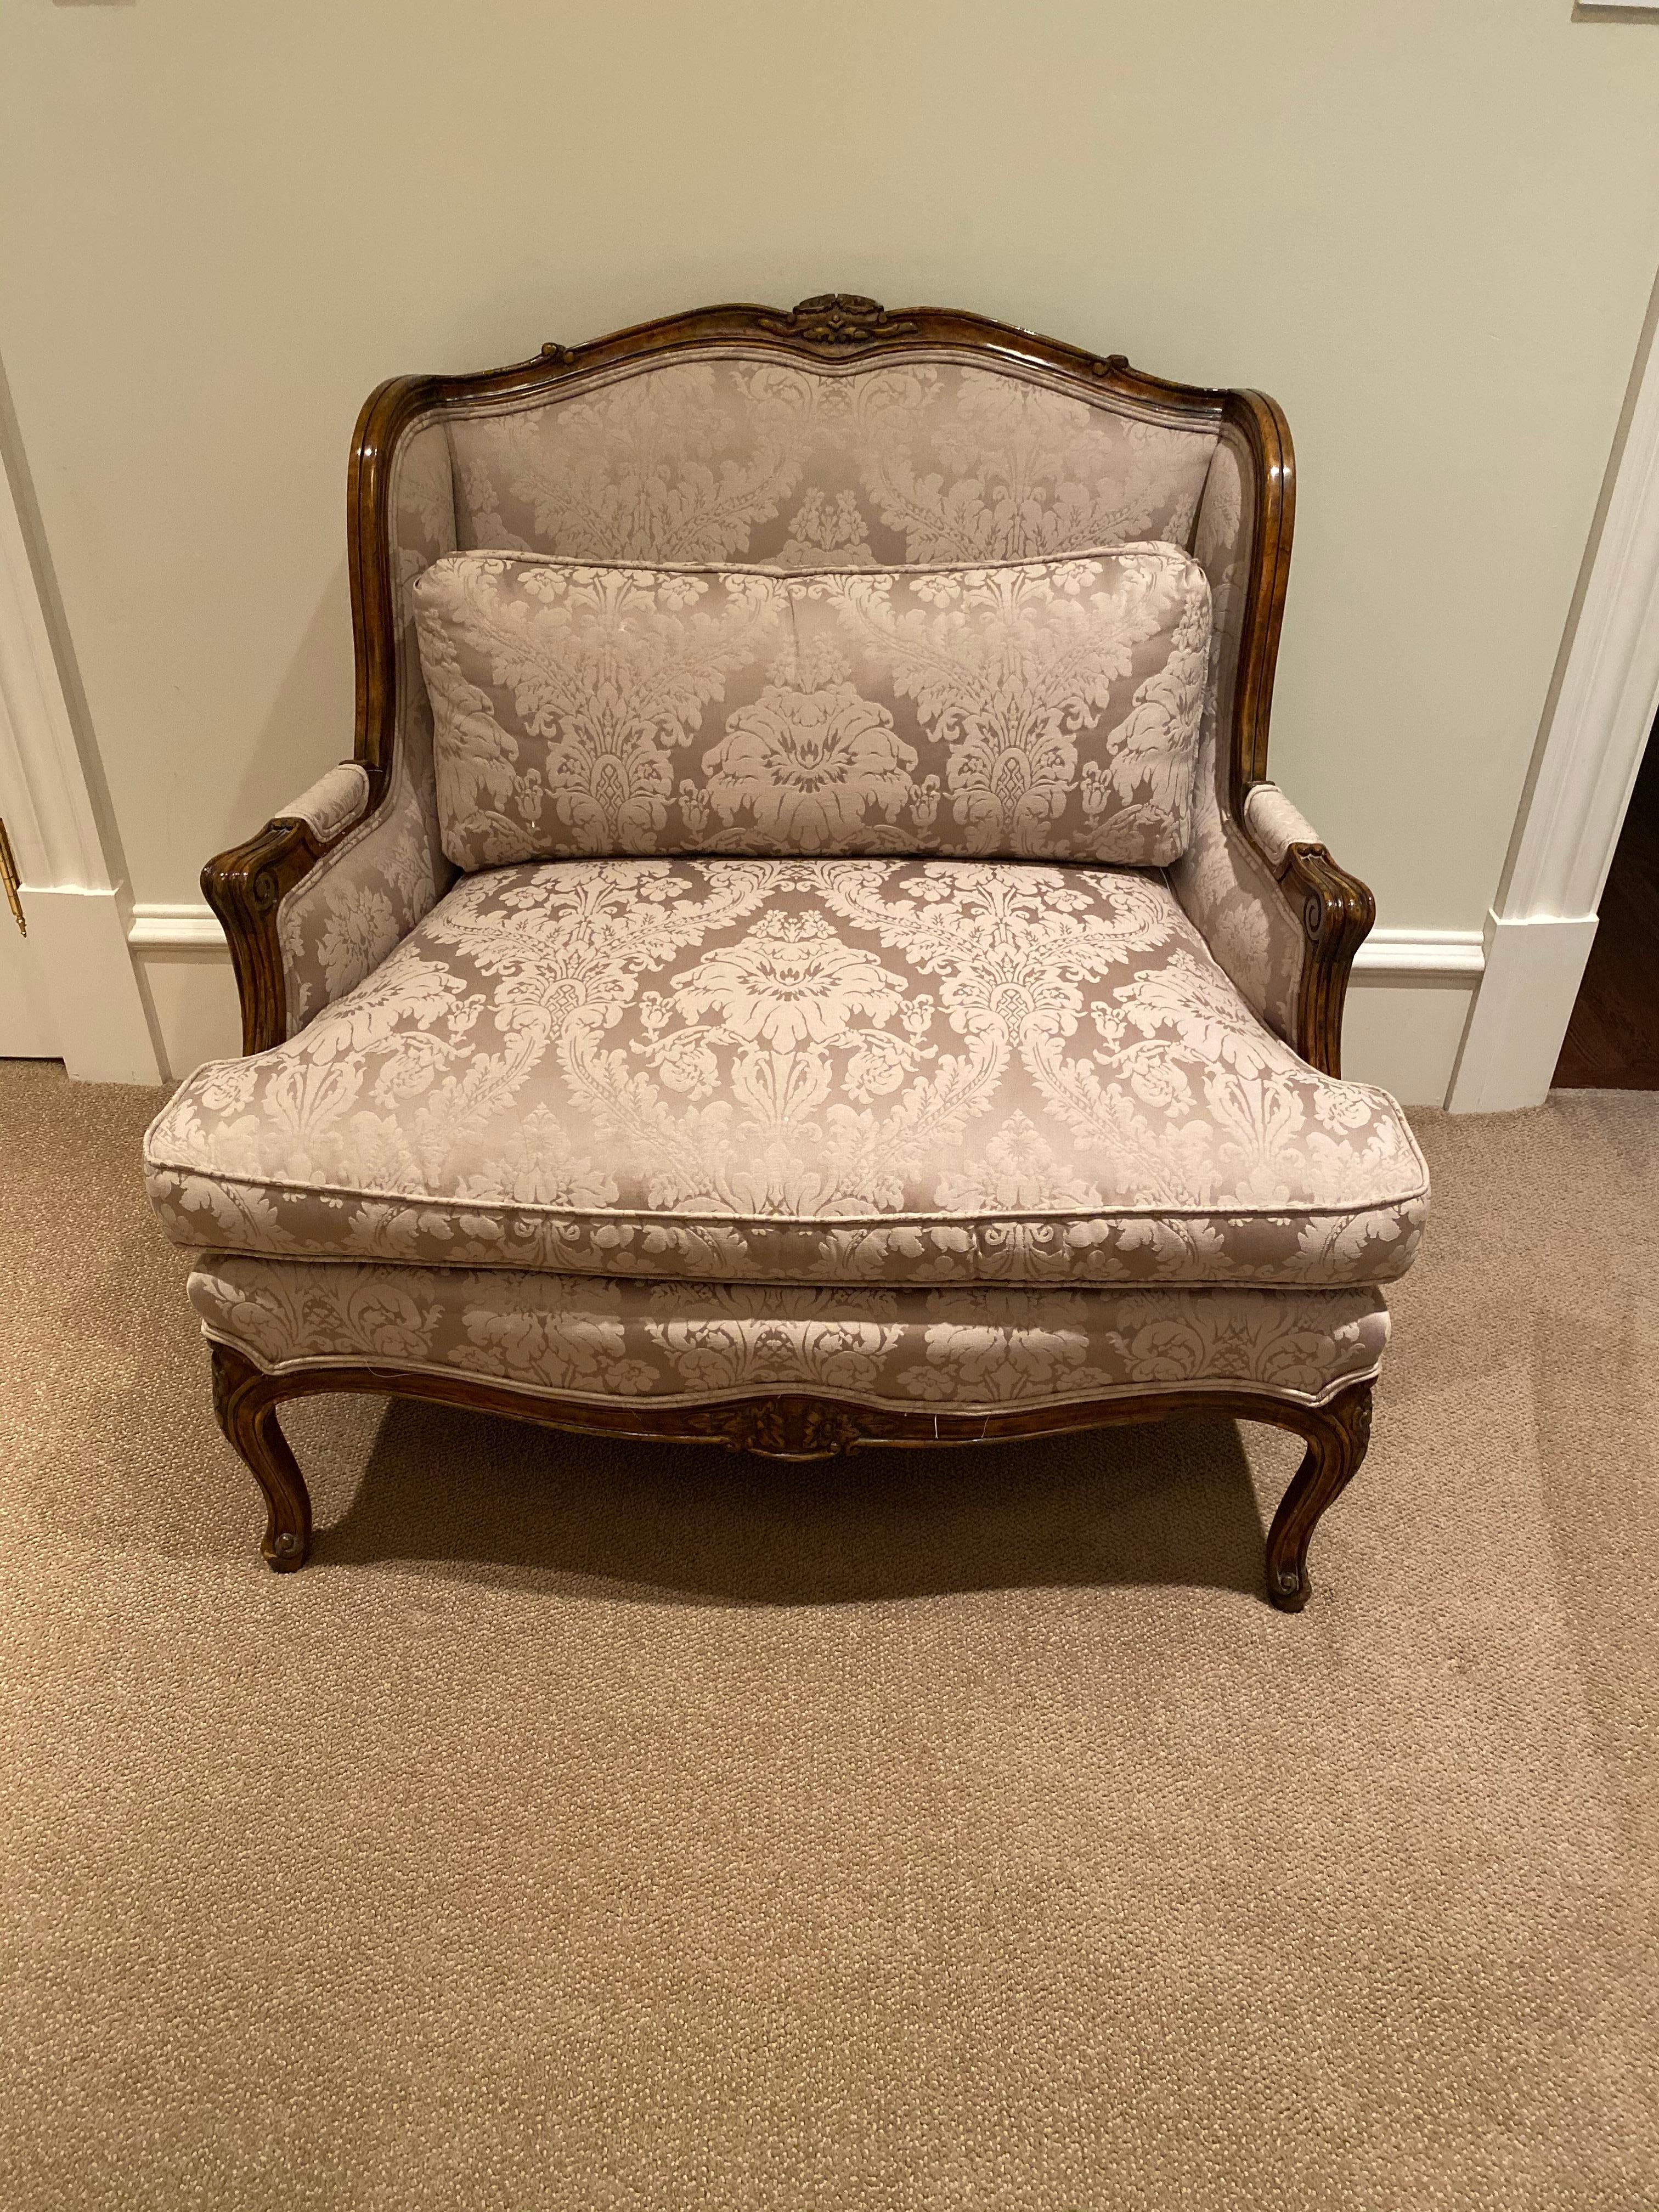 Large bergere chair in silk damask
Beautifully polished wood frame, with lovely detail
This large accent chair has curved legs, stately shape, neutral and elegant silk damask upholstery and accent pillow
perfect in your living room, boudoir or